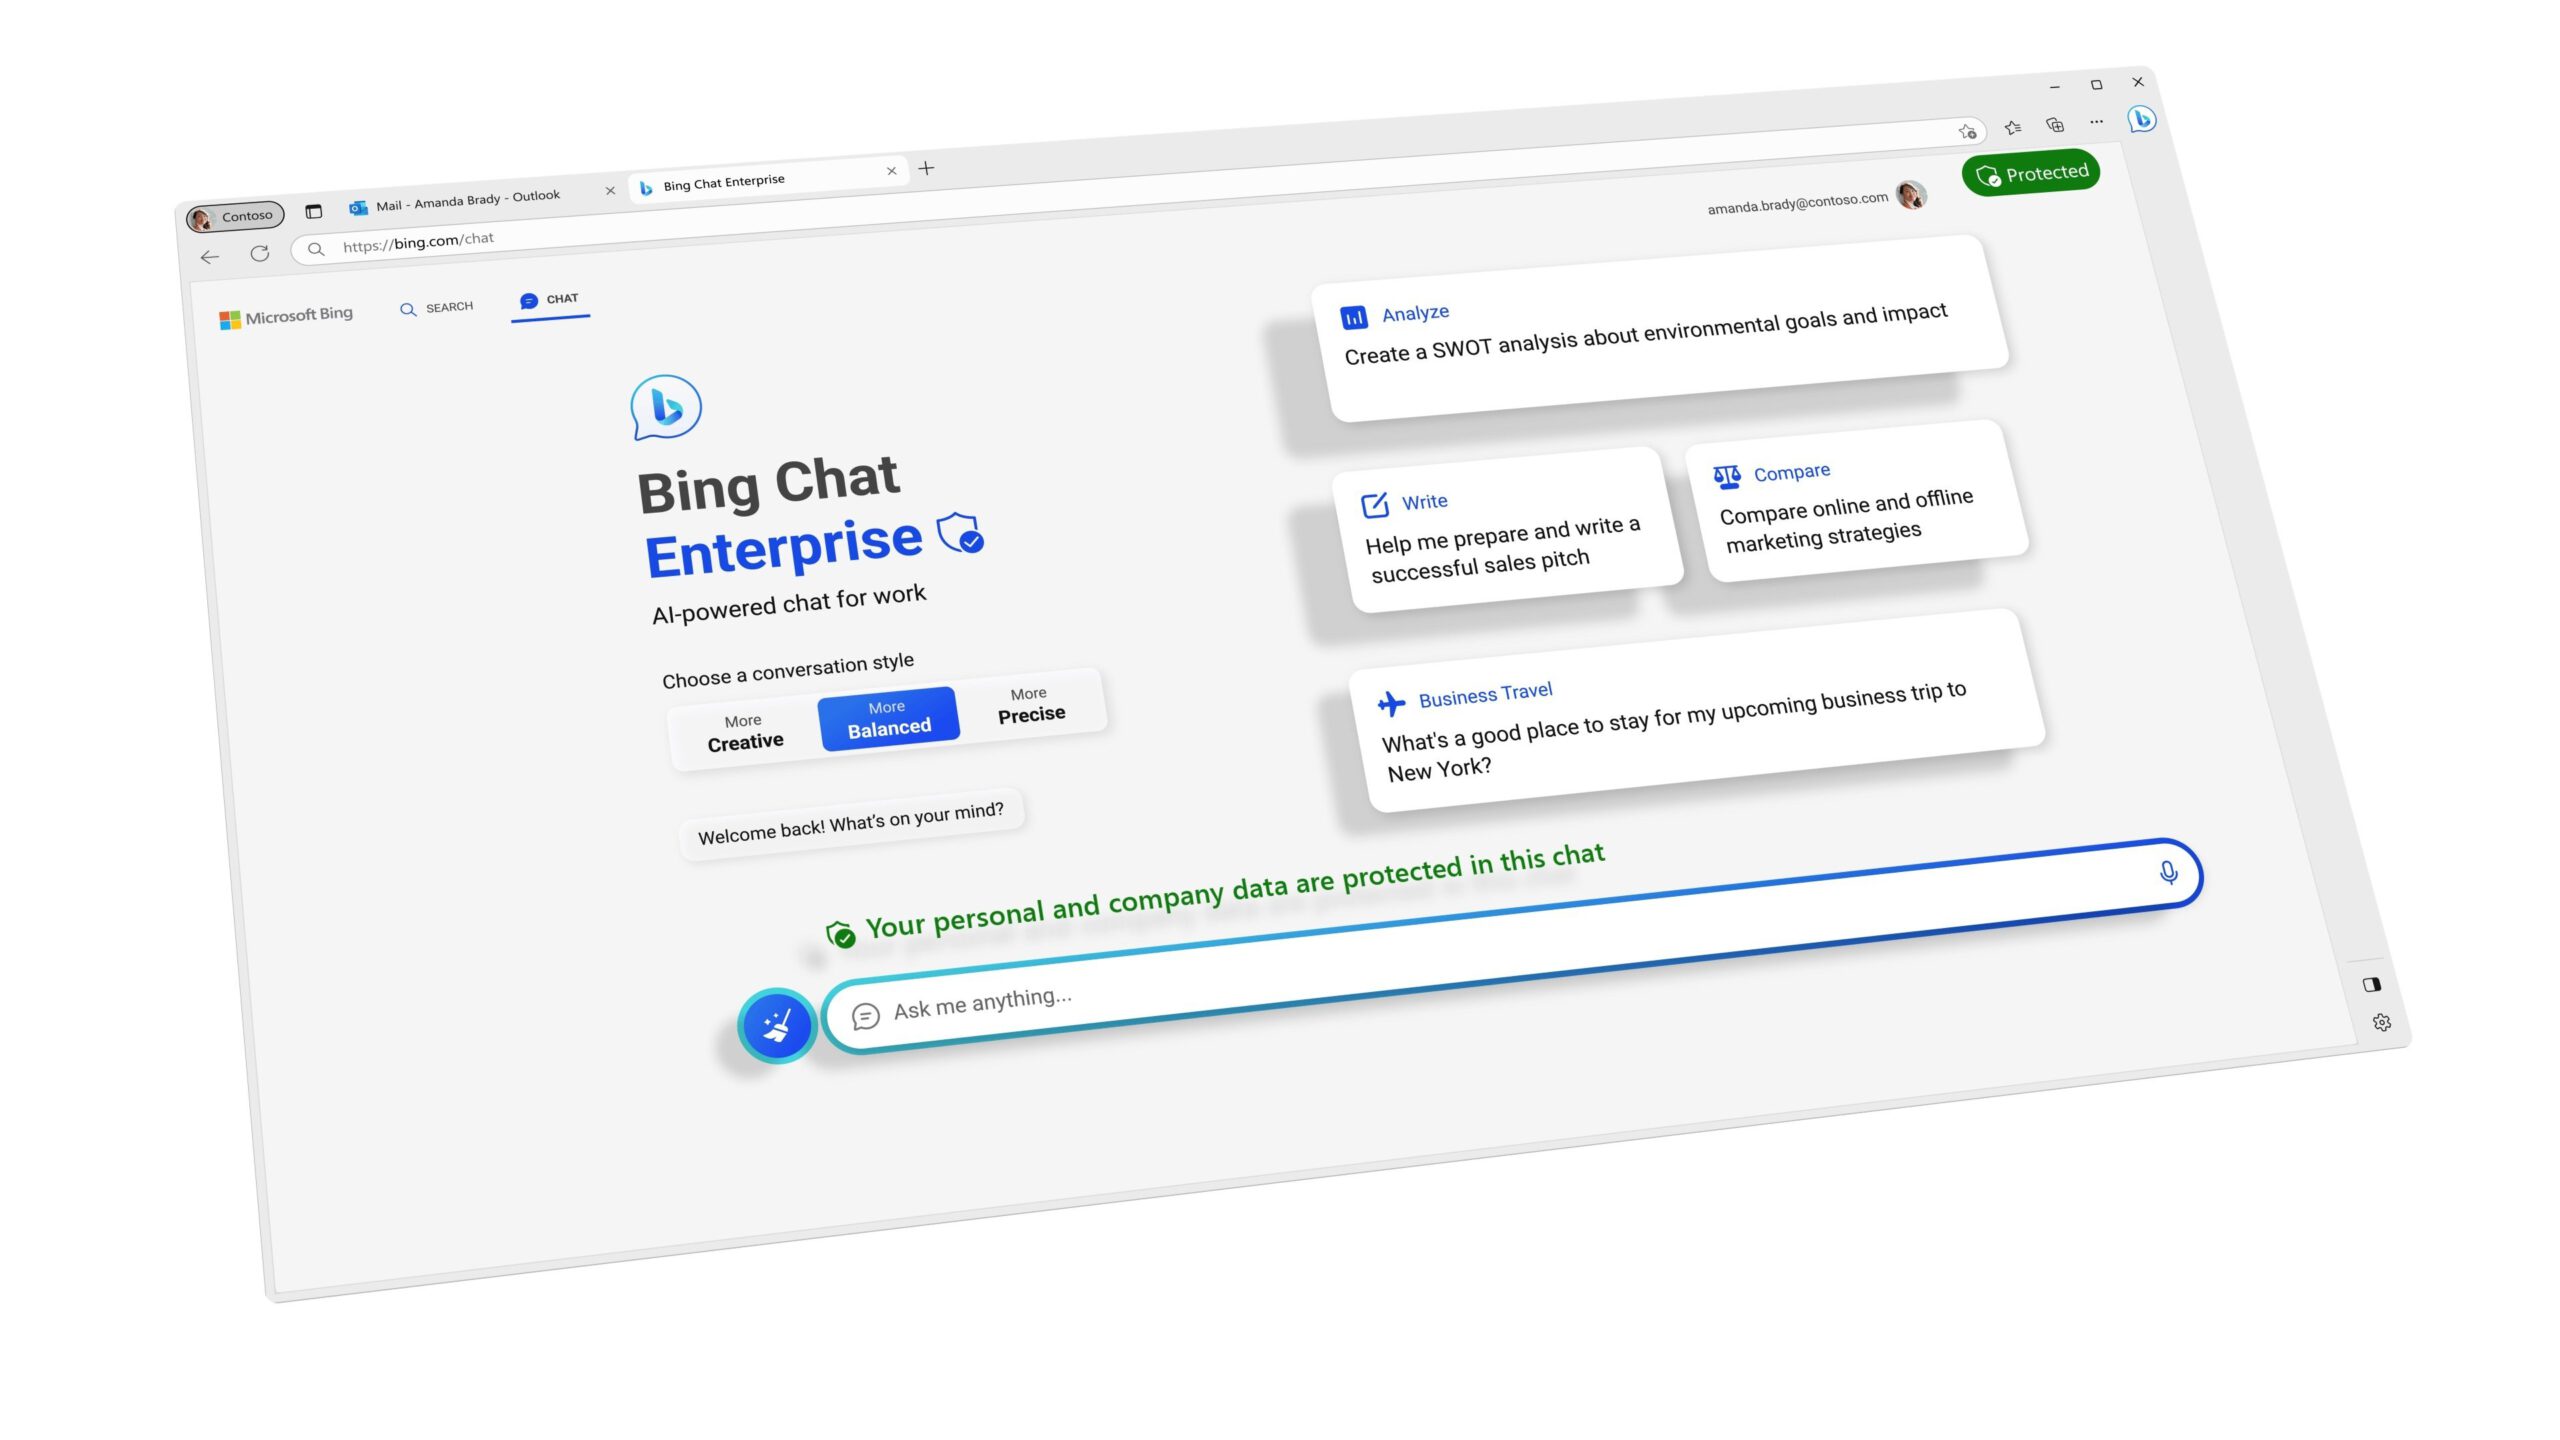 Bing Chat Enterprise showing examples of how it can be used for work